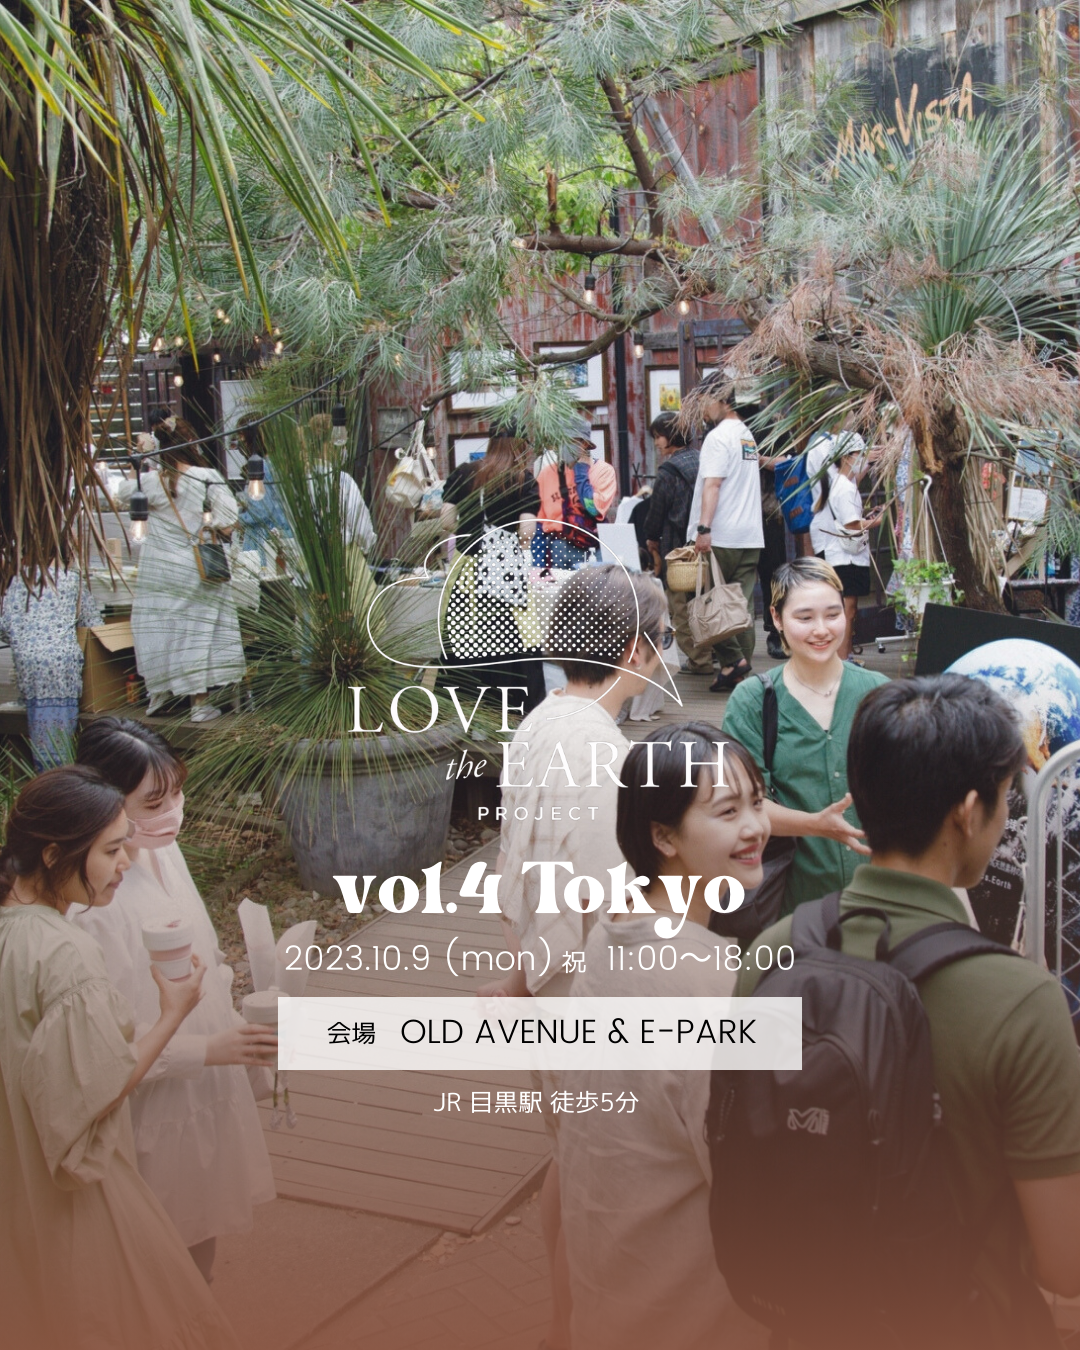 LOVE the EARTH PROJECT in Tokyo